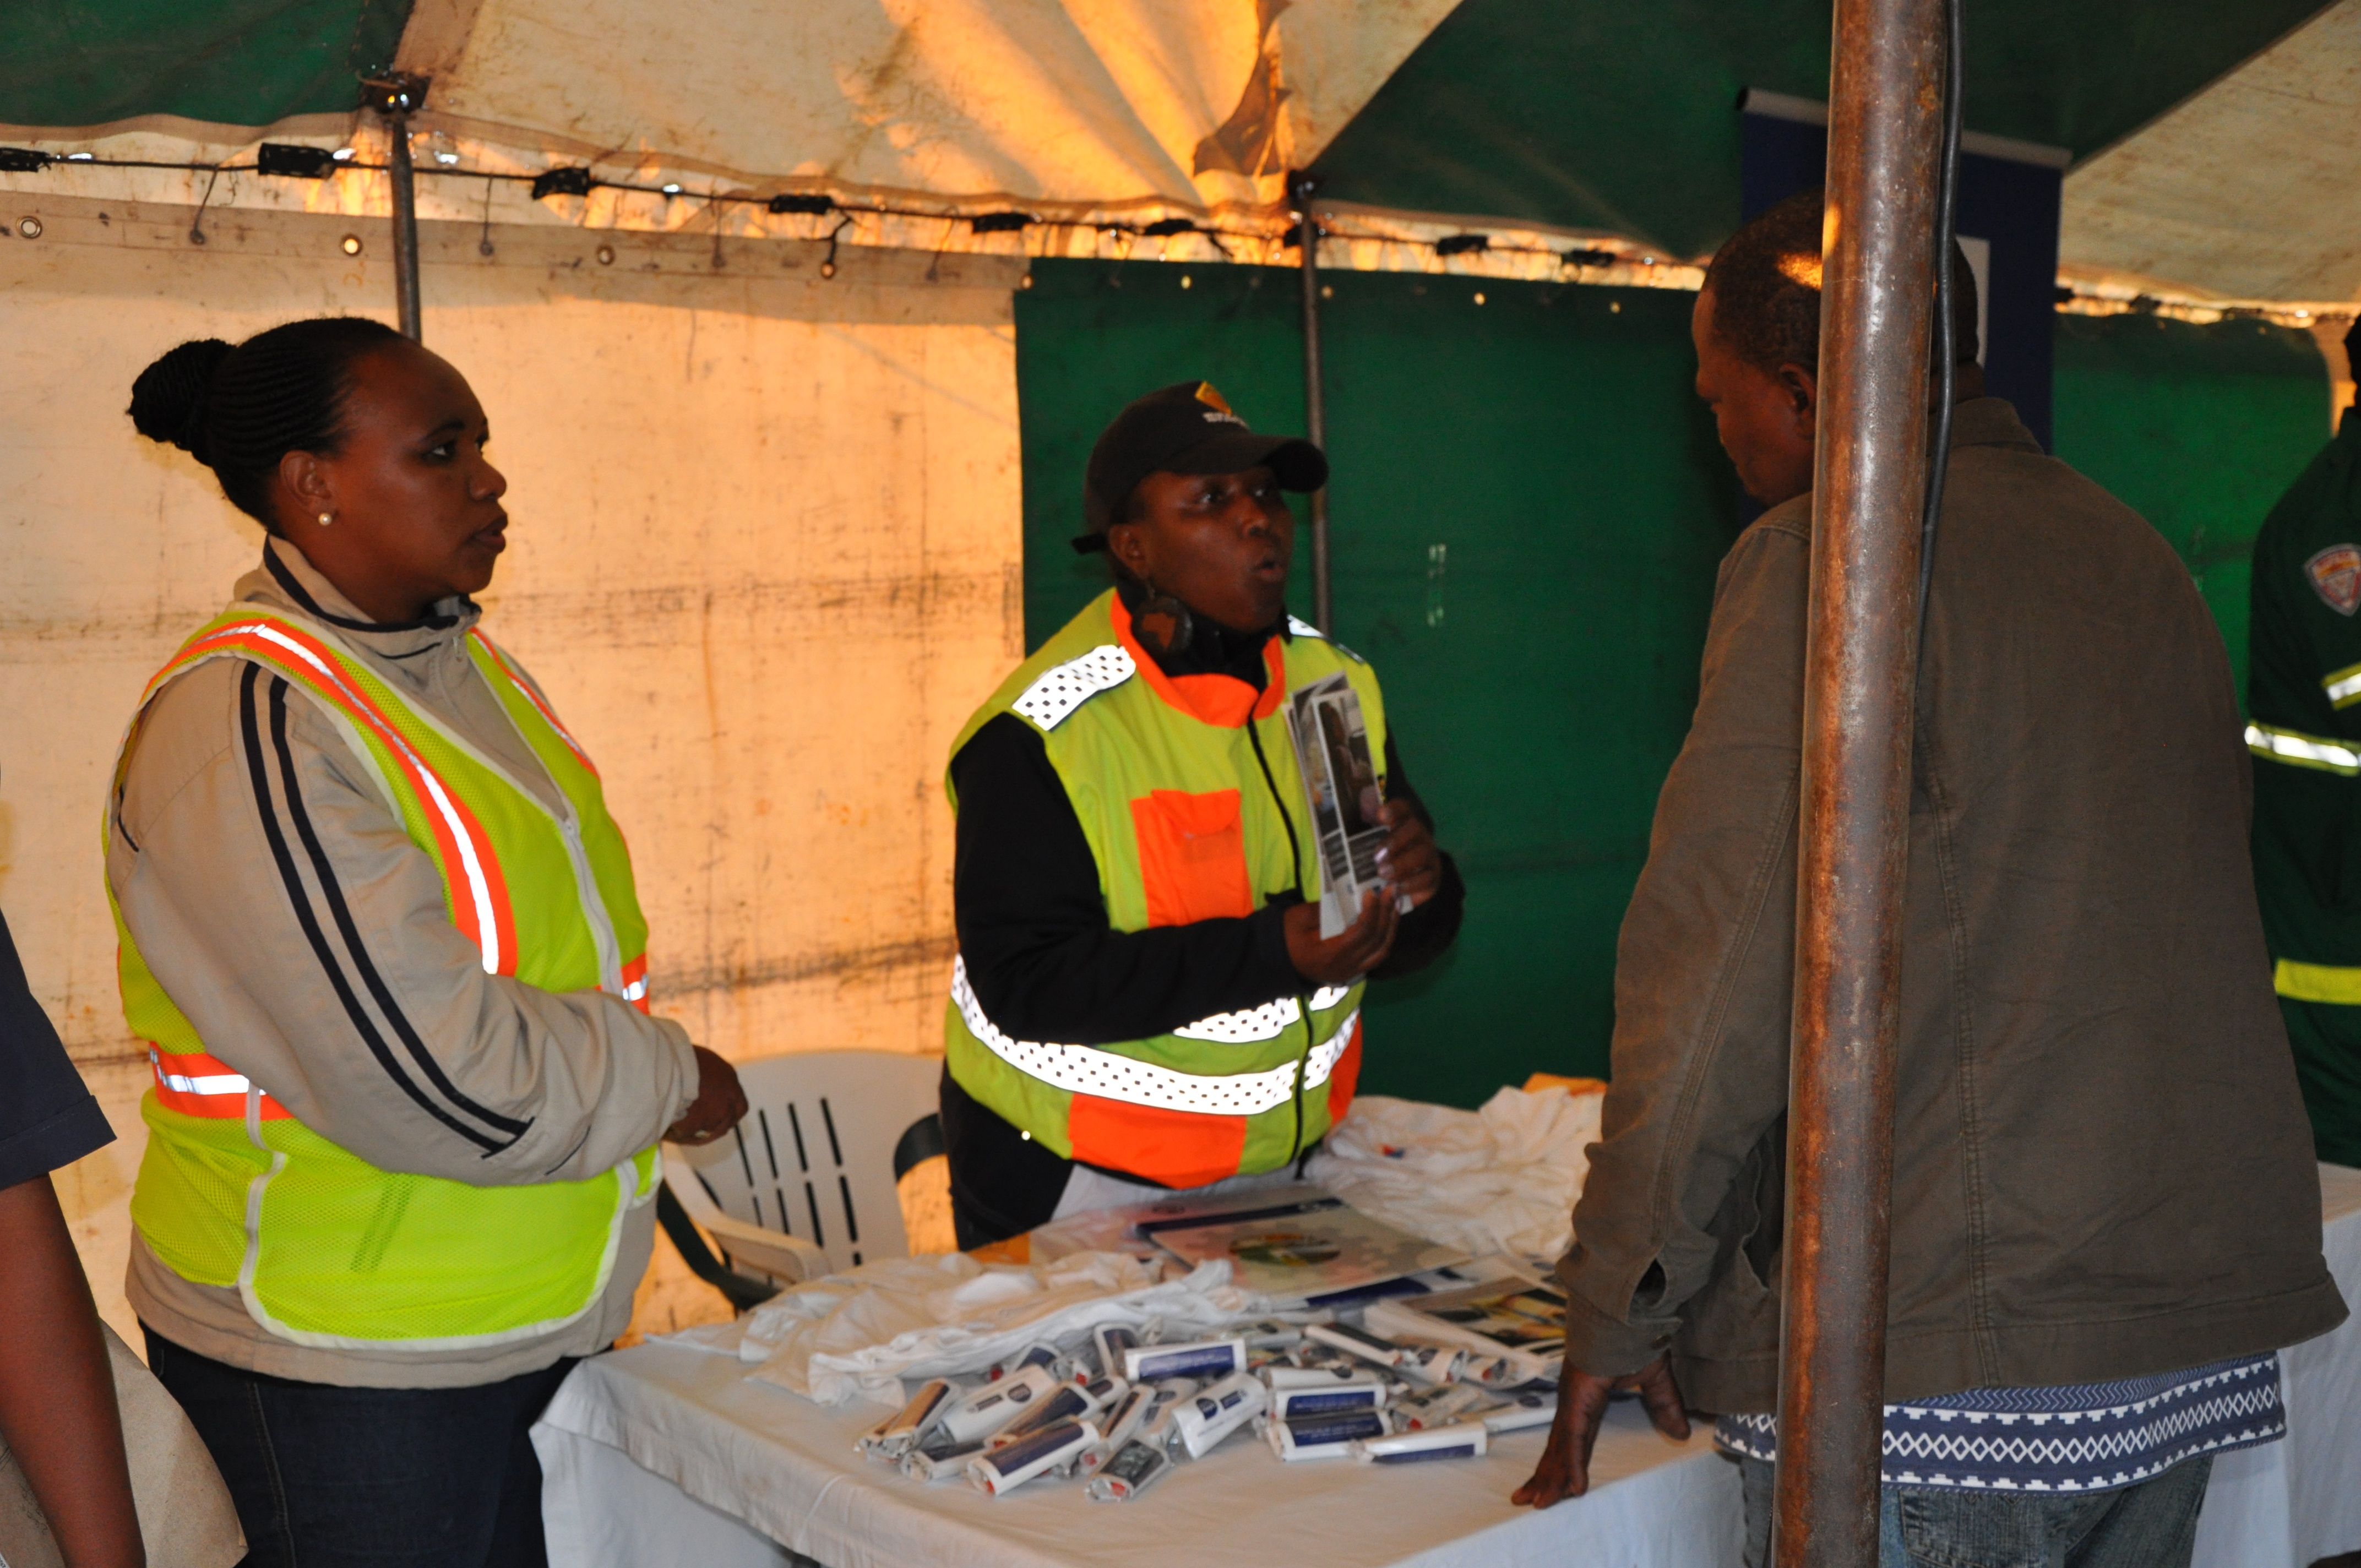 Nombuso Gorata and Zikhona Sikatele speak to a driver about the importance of resting regularly and the breathalyser test.